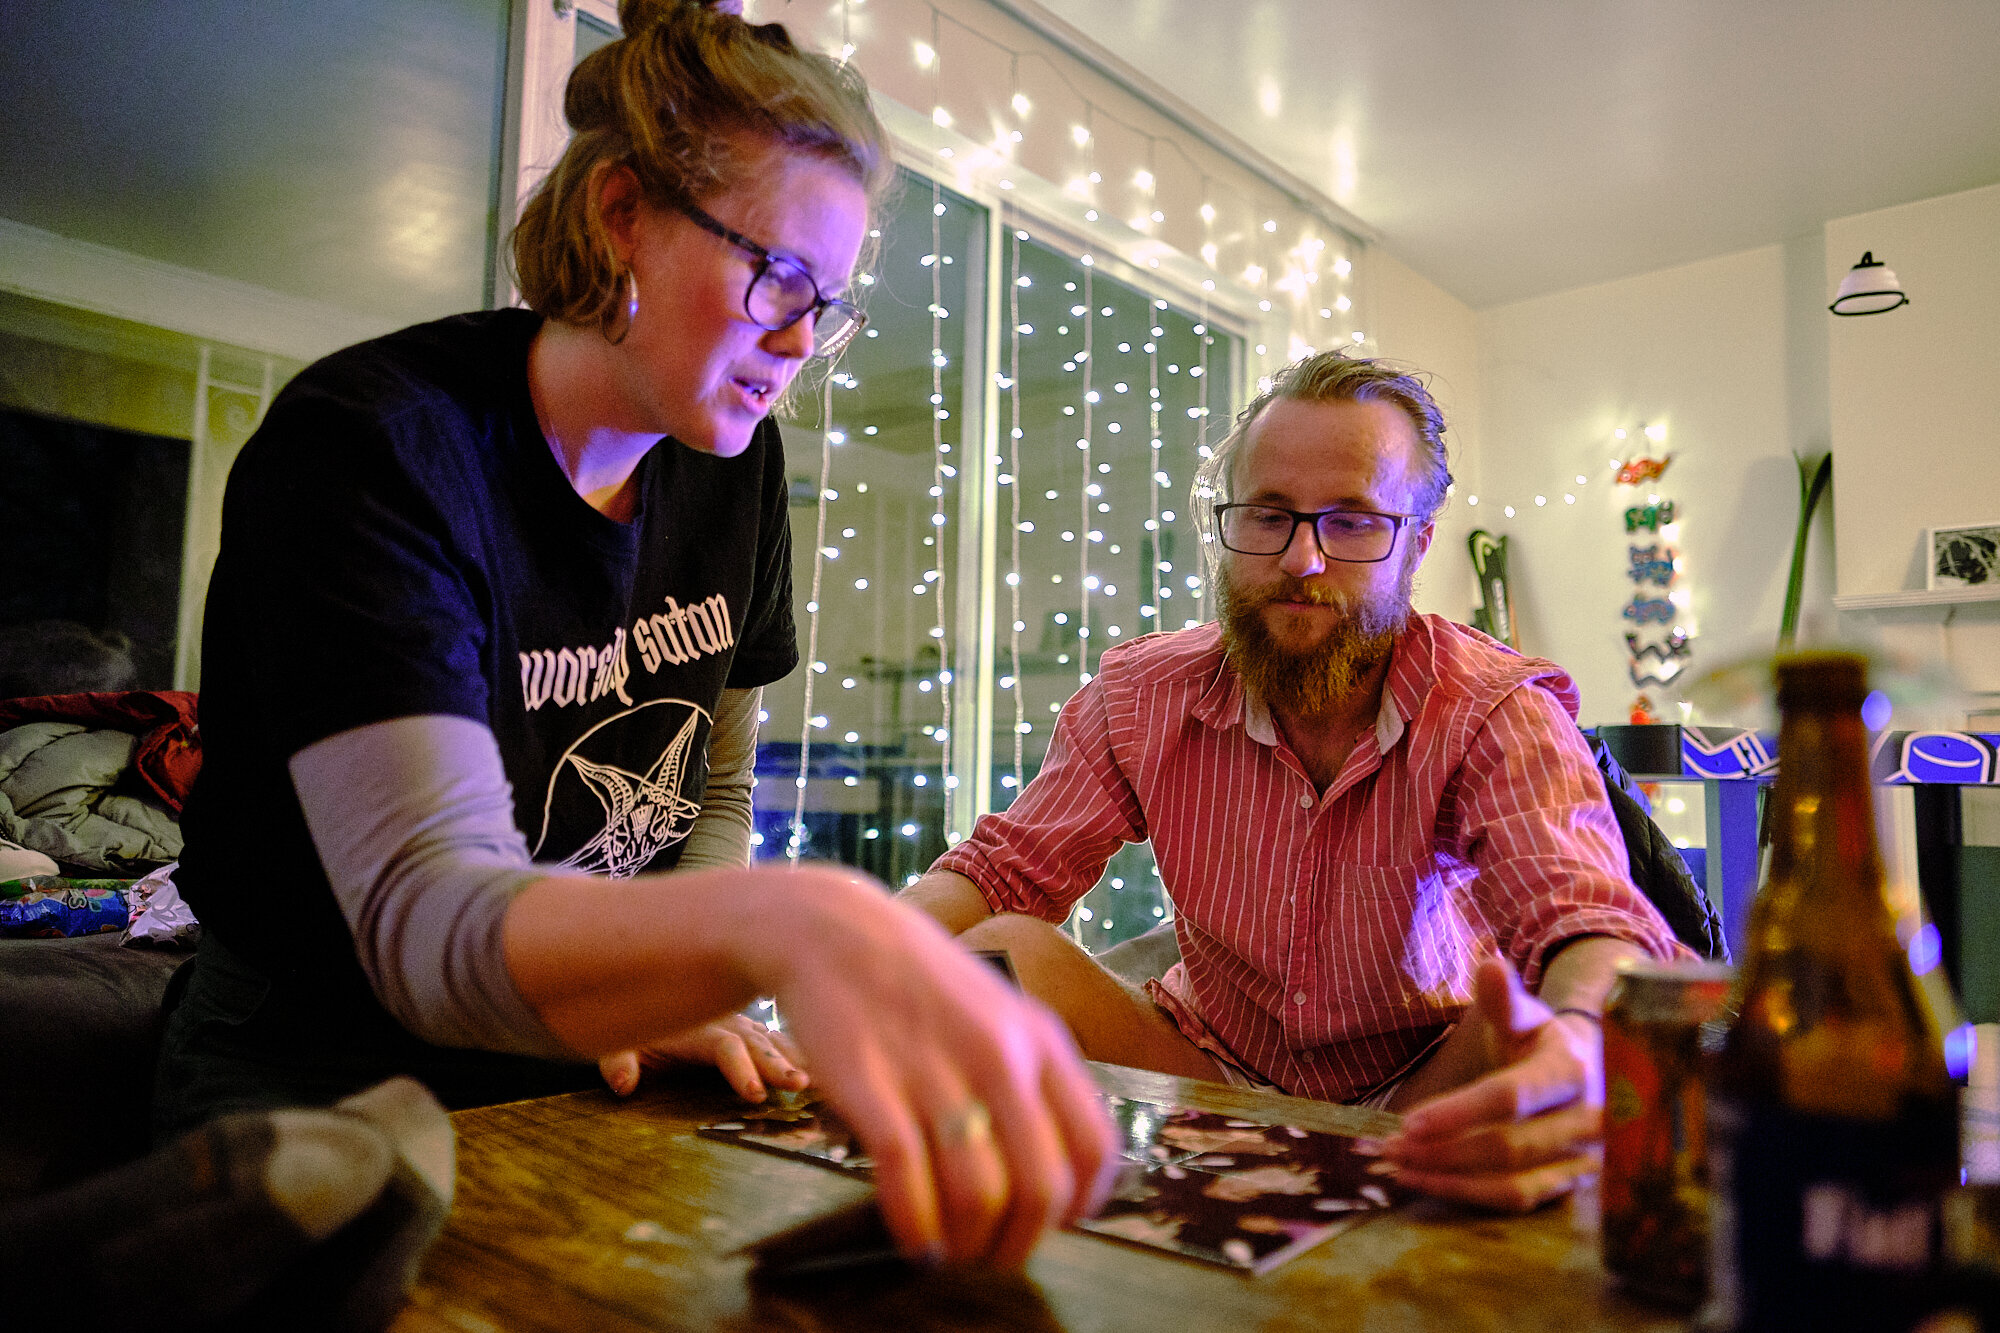  Bullfrog (Quinn, PCT friend) and Lebowski collaborate on a puzzle given to Lebowski for Christmas. Coincidentally, it is a Big Lebowski themed puzzle. | Holladay, UT 12/25/19 